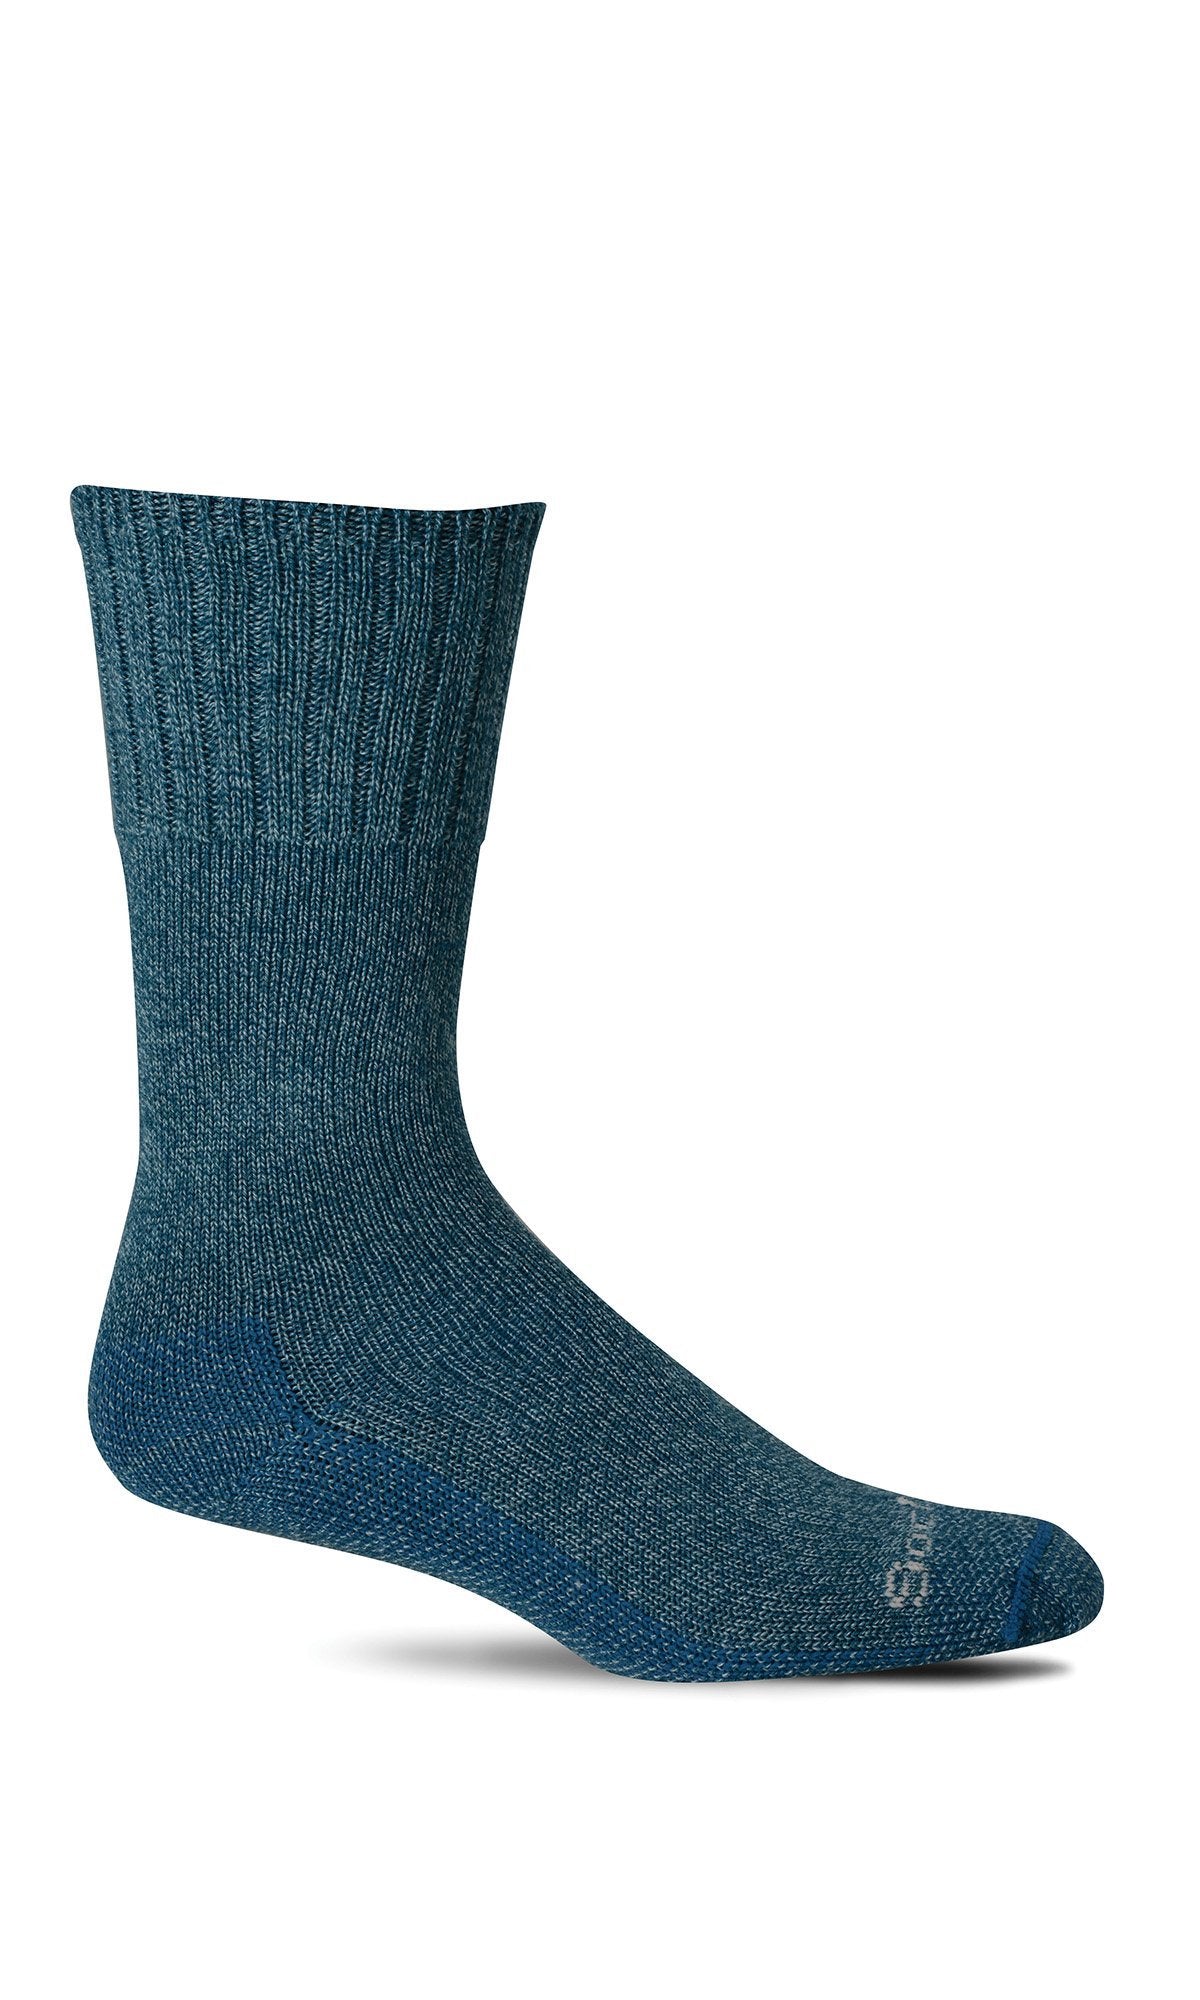 Pamper and protect your feet in Sockwell's Big Easy relaxed fit non-binding diabetic-friendly merino wool socks in vibrant teal